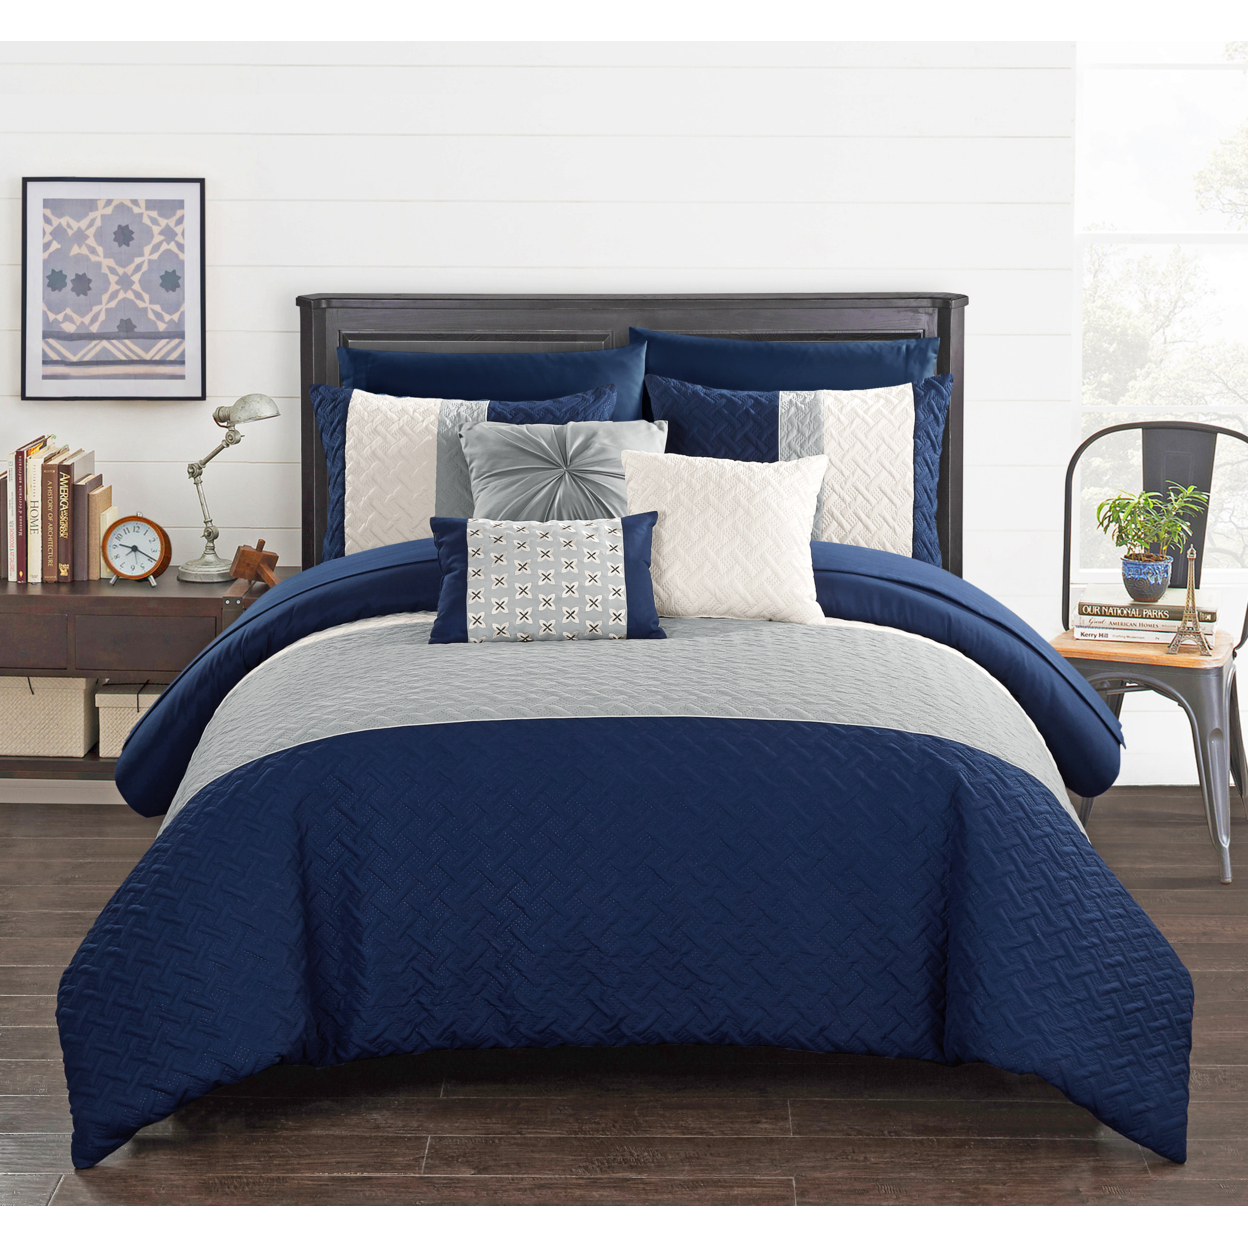 Chic Home Shaila 10 Or 8 Piece Comforter Set Color Block Quilted Embroidered Design Bed In A Bag Bedding - Navy, Twin